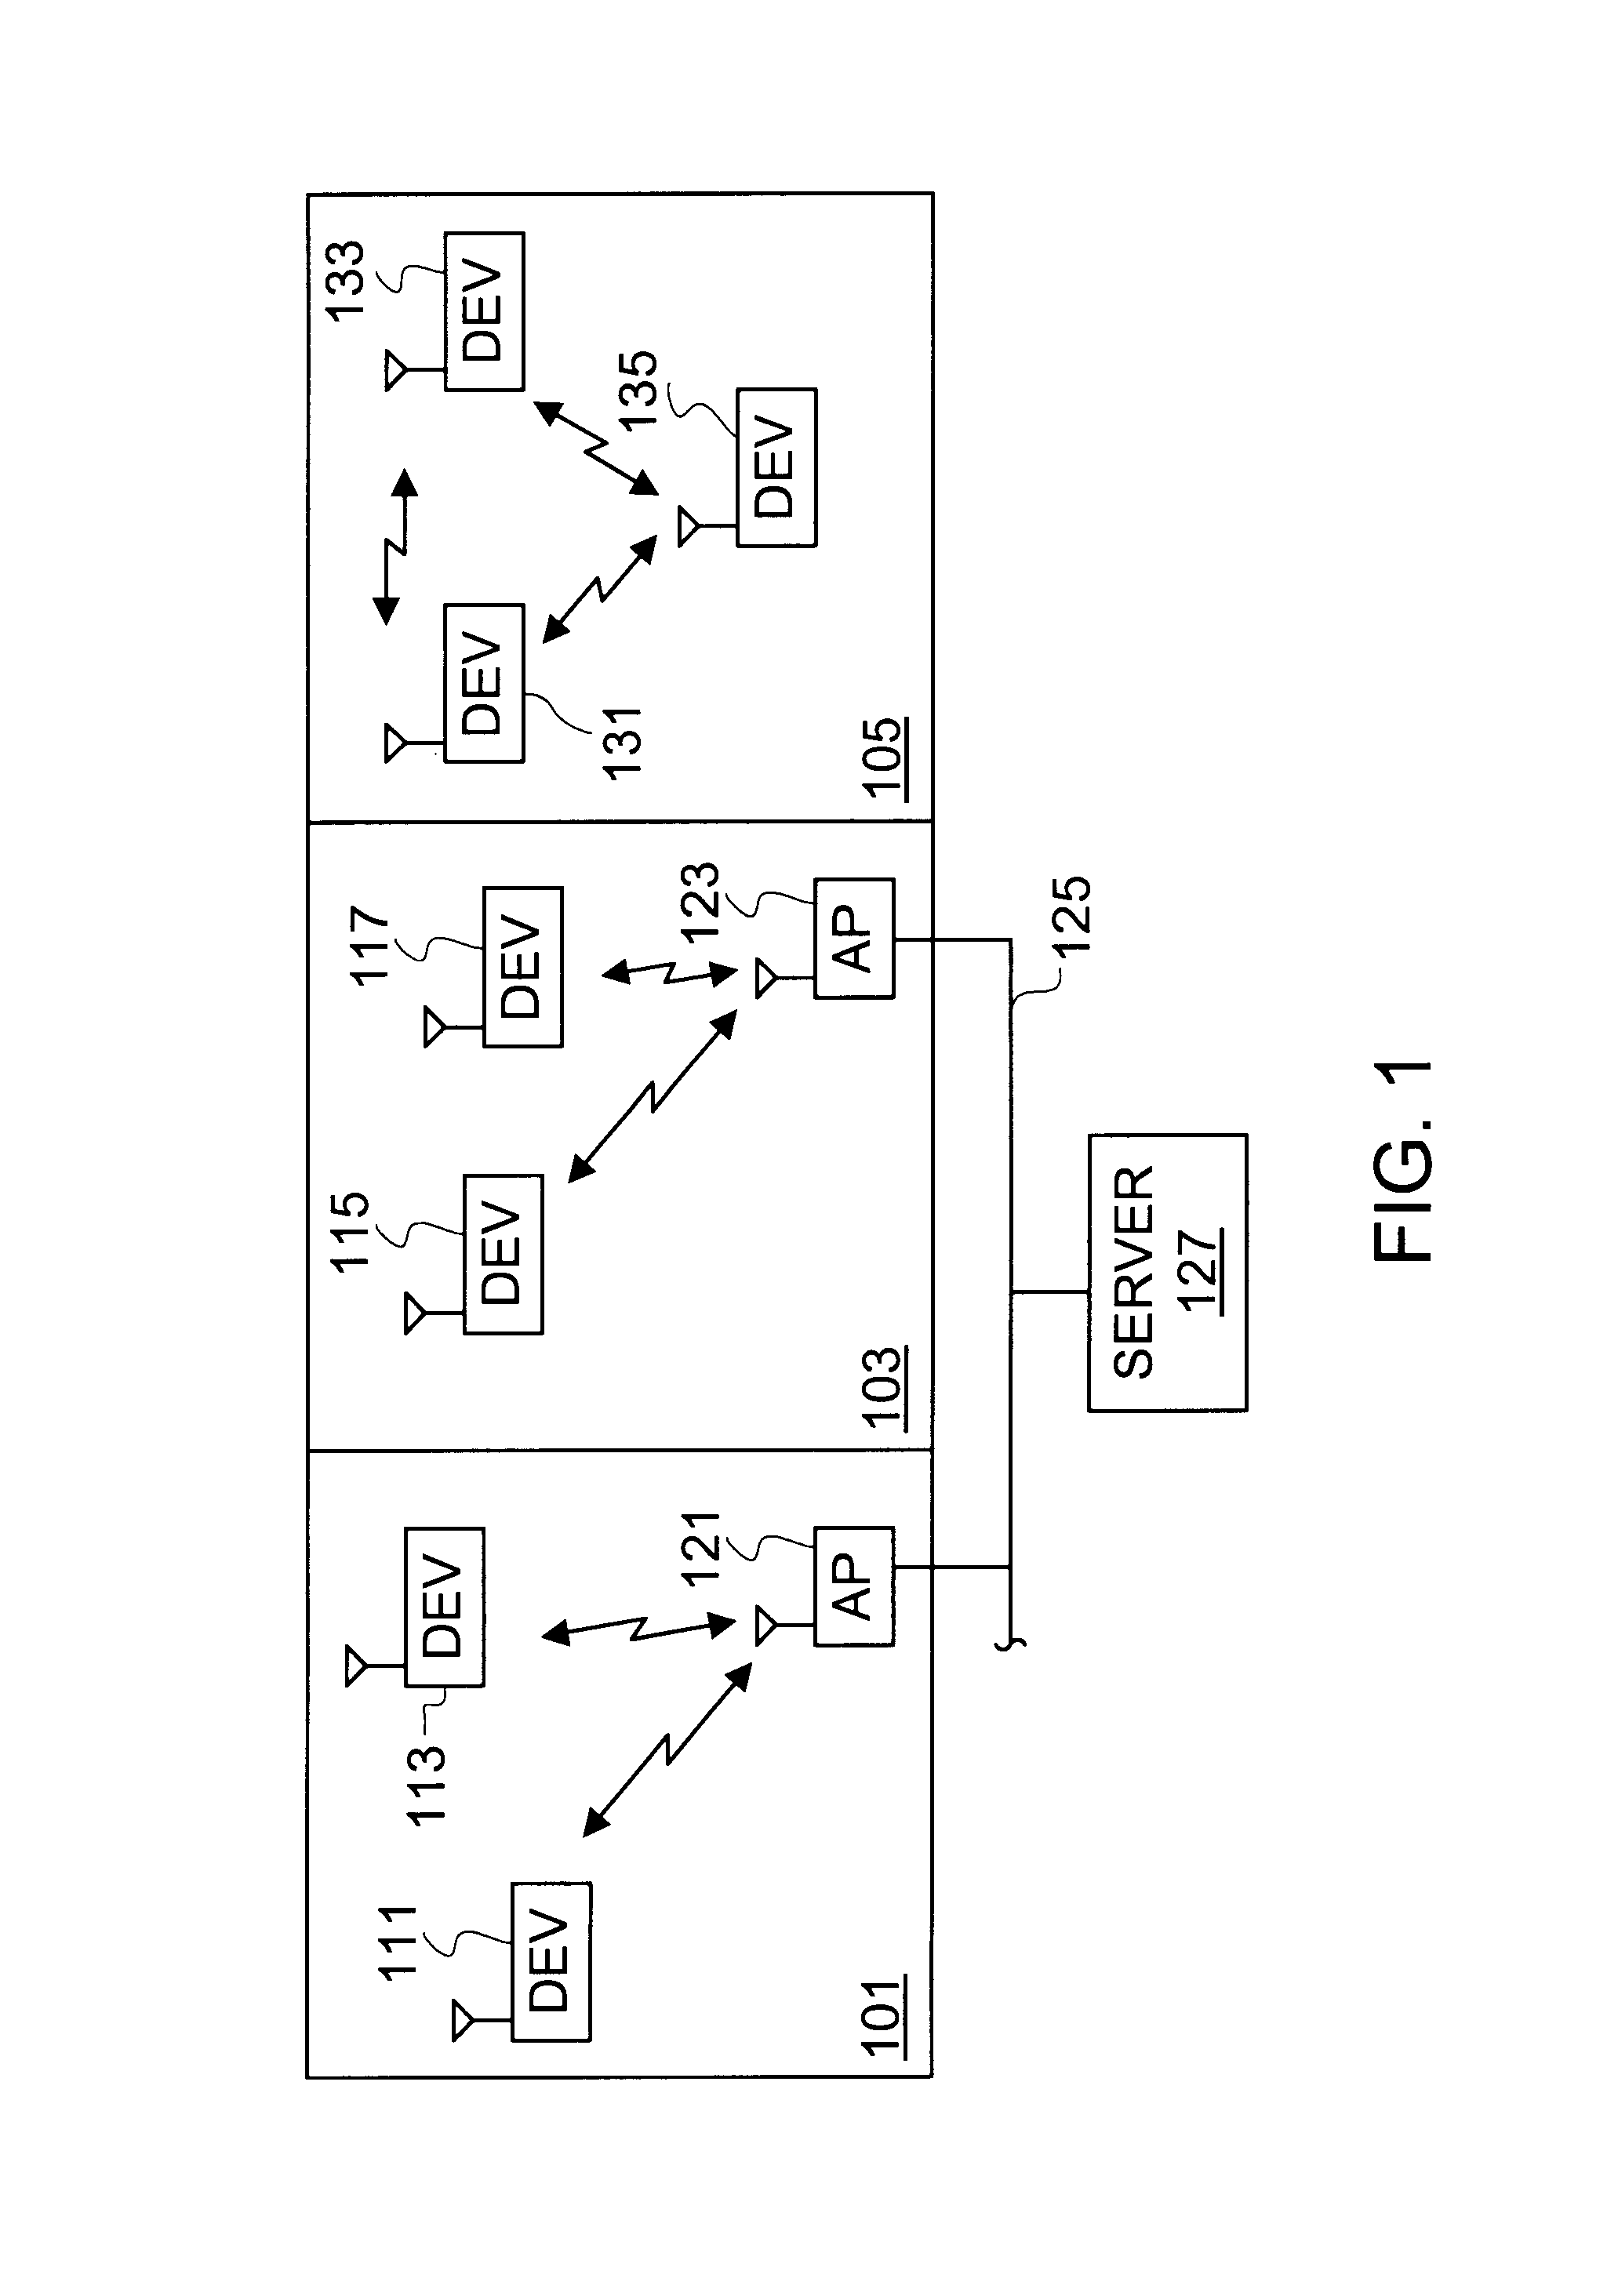 Calibrated DC compensation system for a wireless communication device configured in a zero intermediate frequency architecture